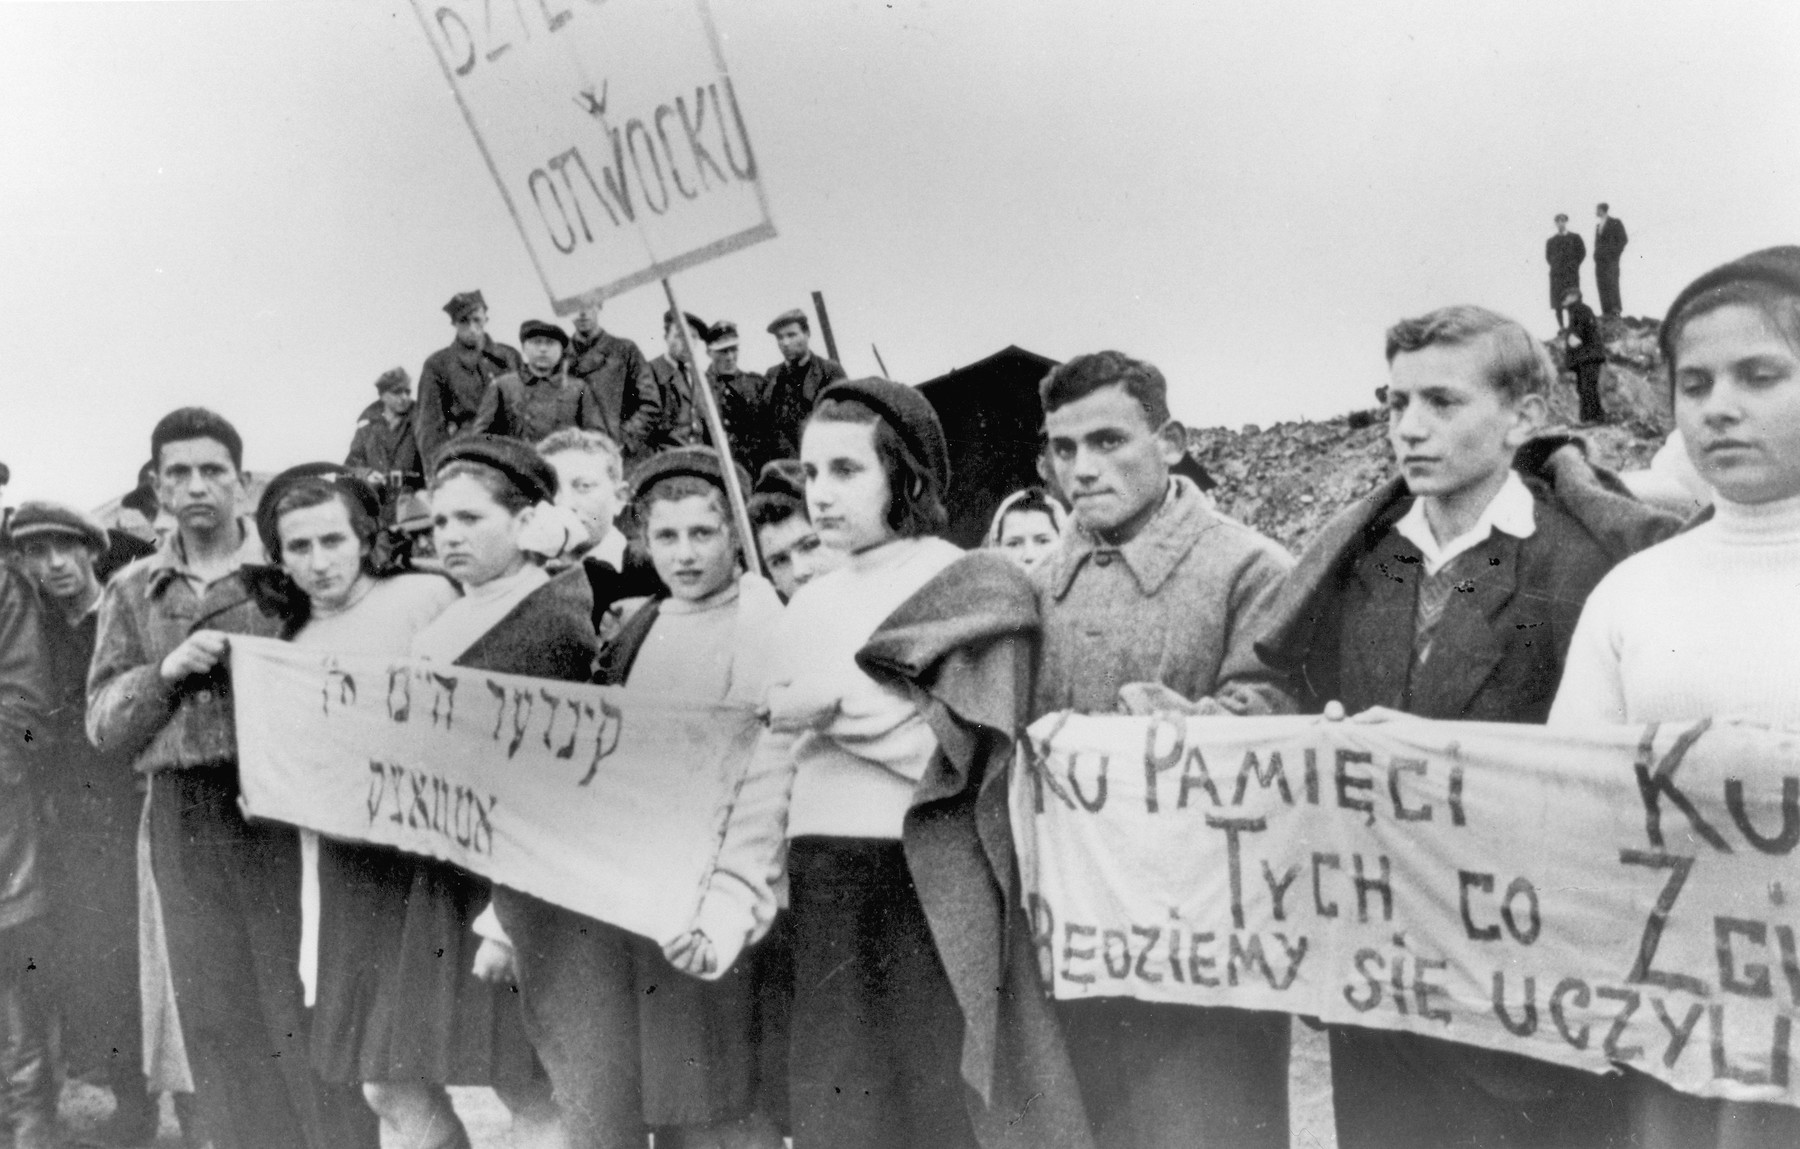 Jewish children from Otwock carrying signs and banners attend a demonstration [probably to mark the fourth anniversary of the Warsaw ghetto uprising].